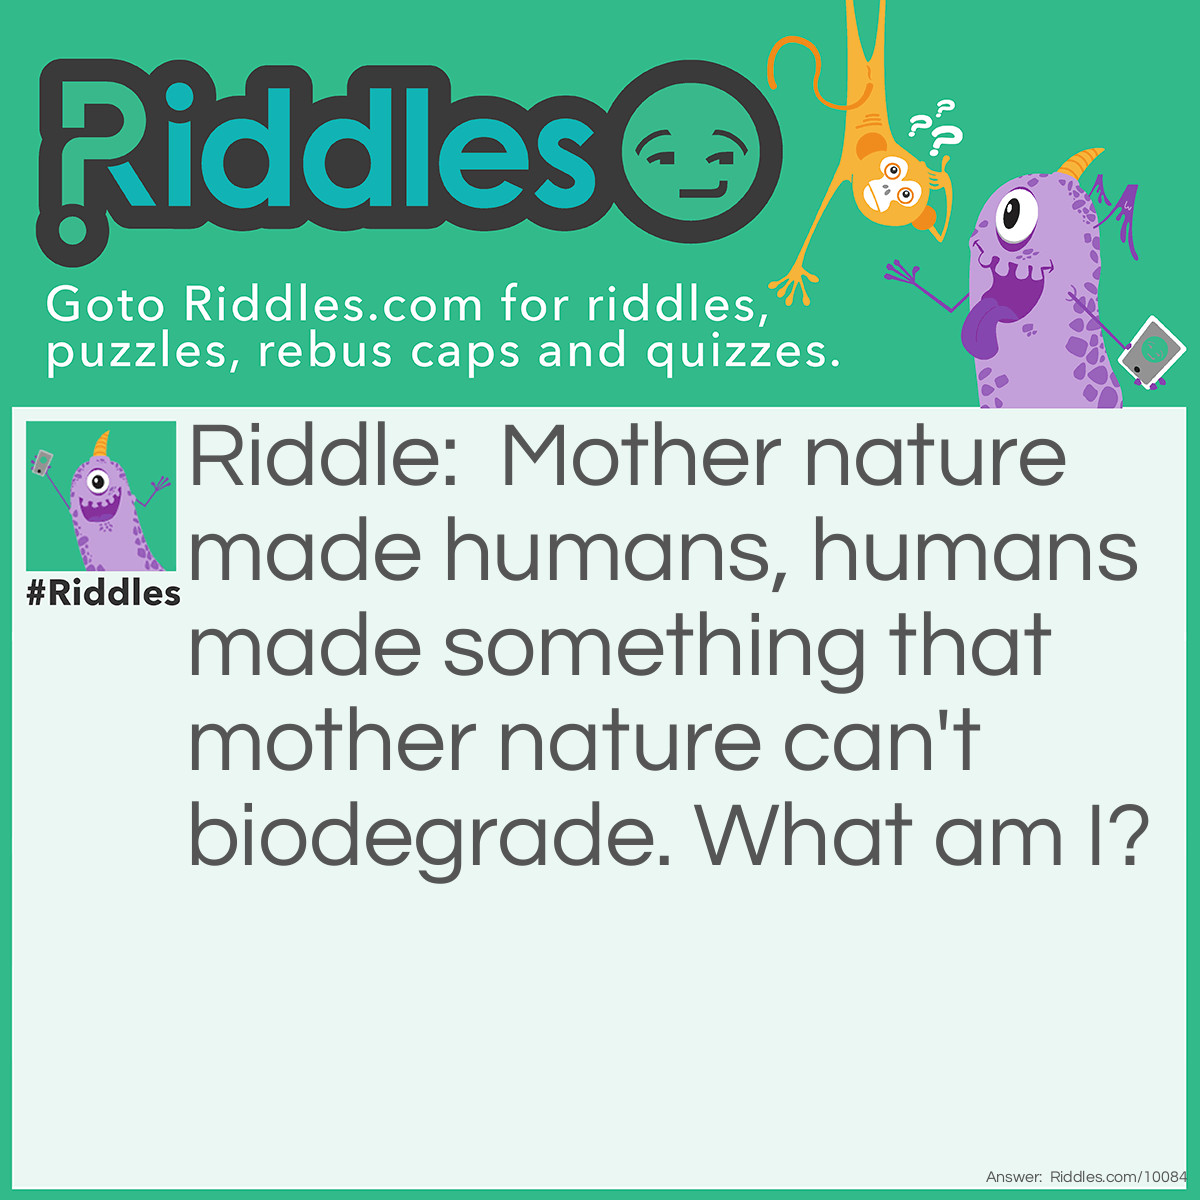 Riddle: Mother nature made humans, humans made something that mother nature can't biodegrade. What am I? Answer: I am plastic.